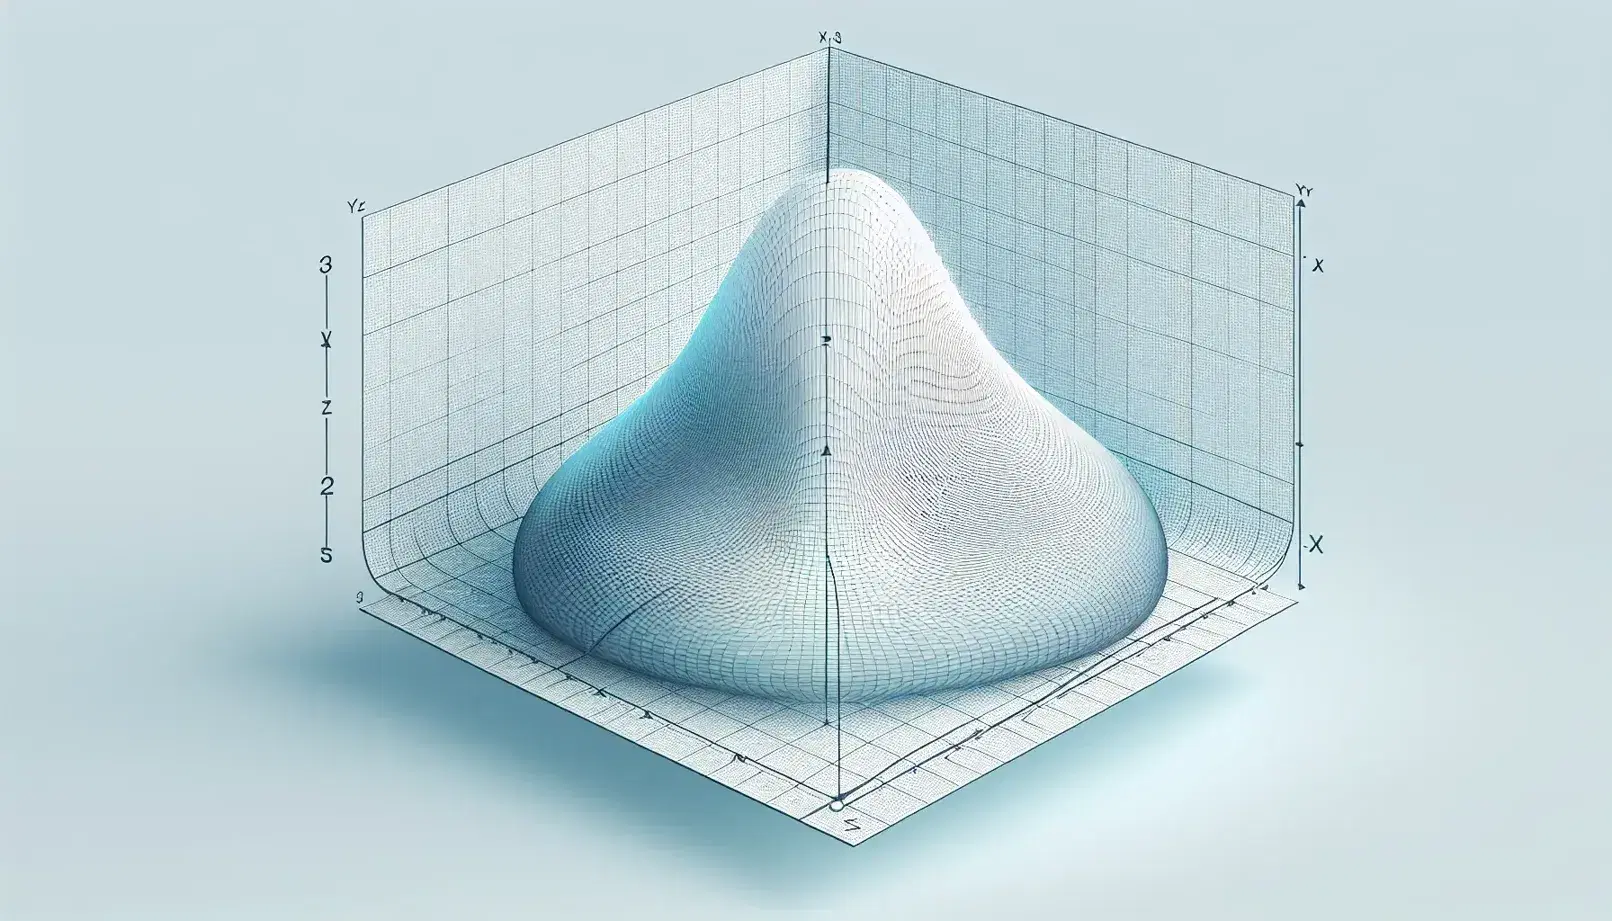 Three-dimensional Cartesian coordinate system with axes and a semi-transparent blue gradient mound shape peaking along the z-axis.